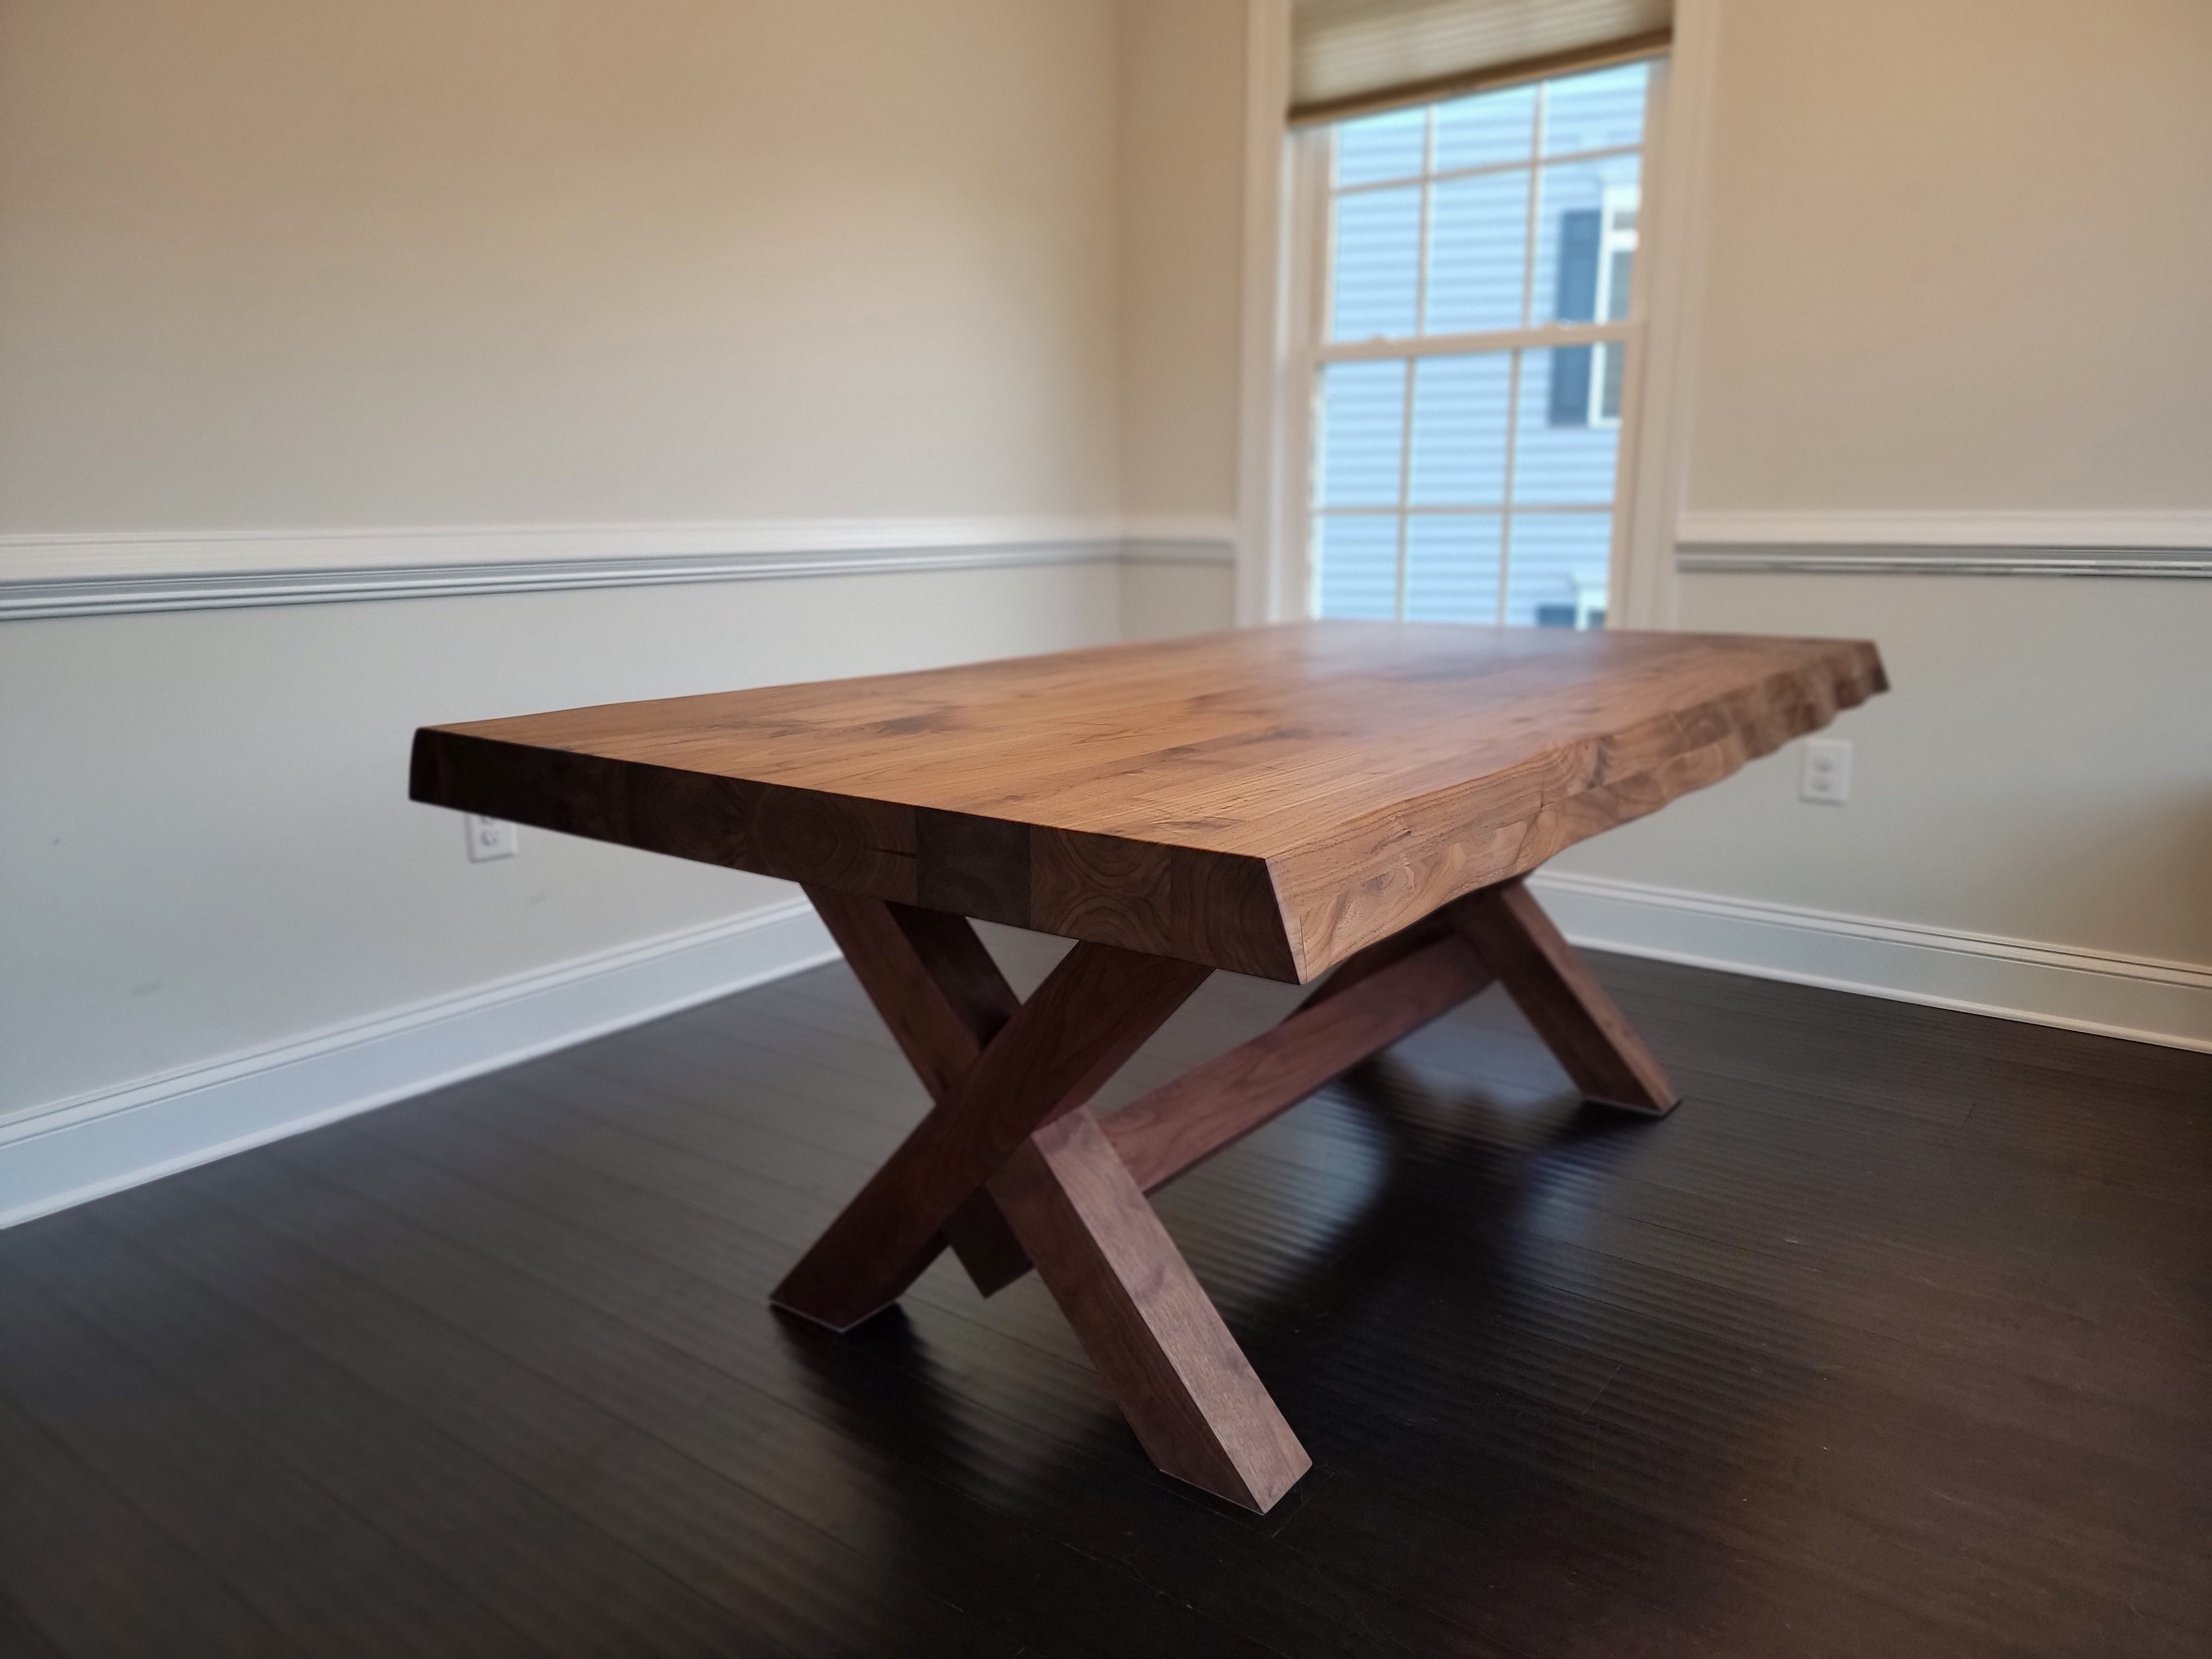 An example of a Custom Dining Tables